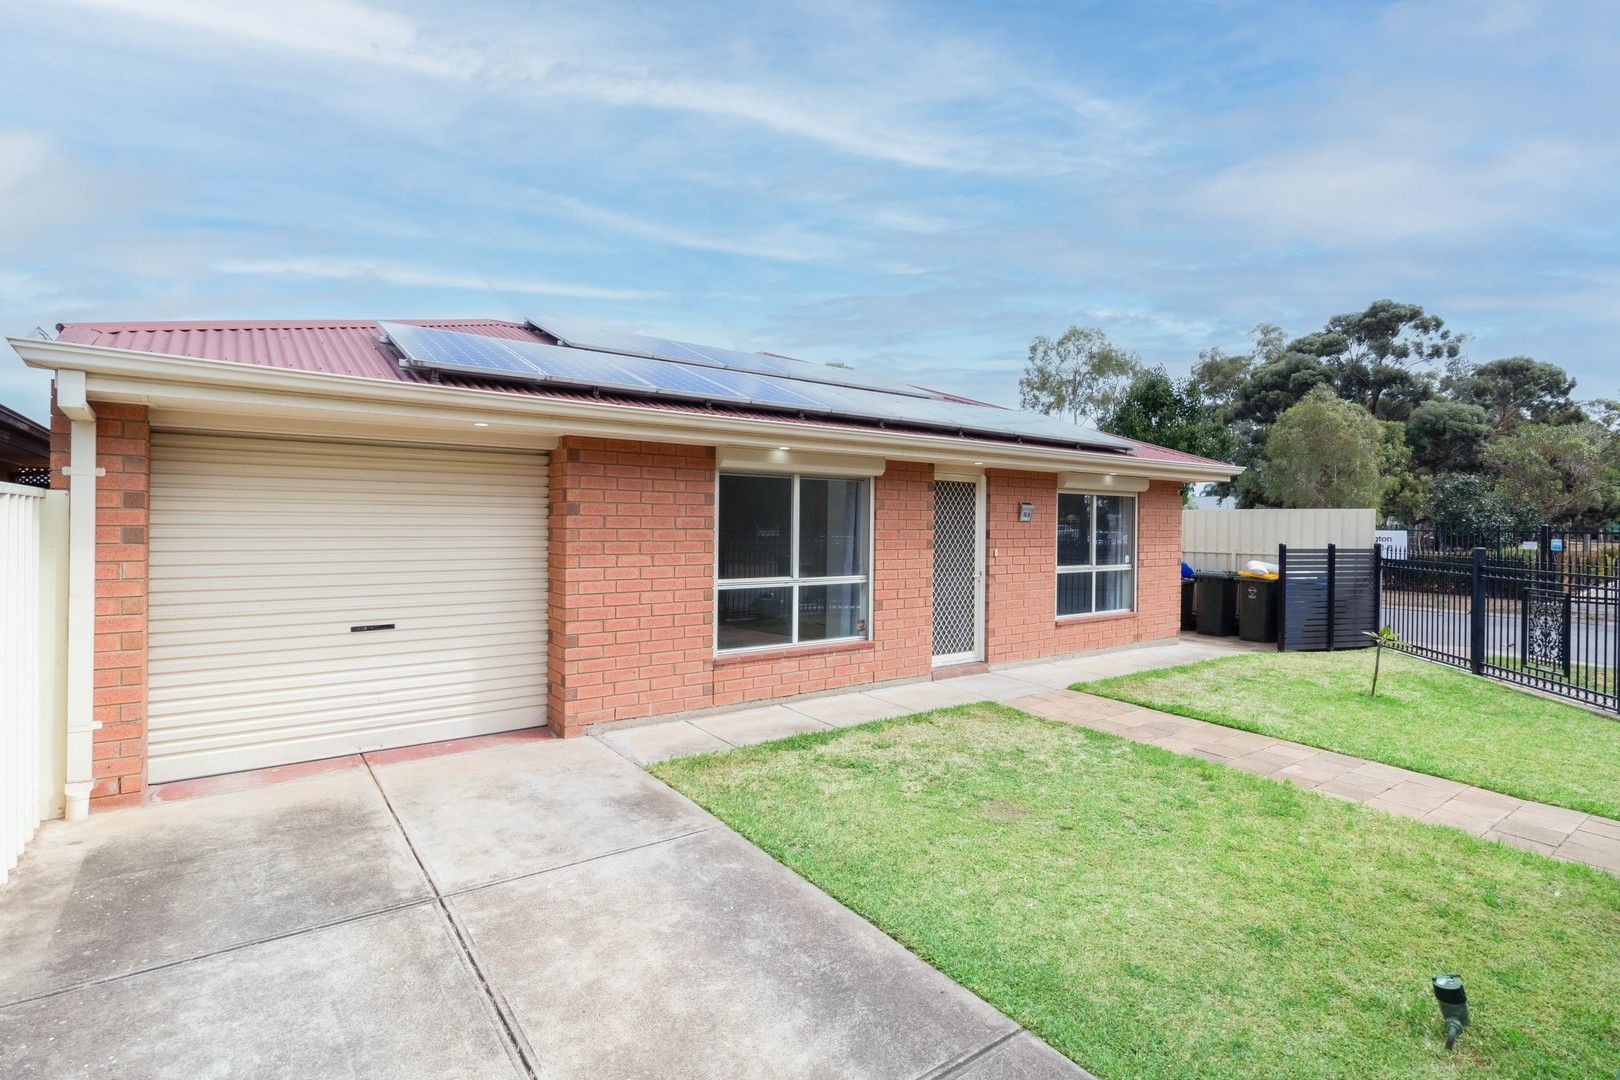 3 bedrooms House in 16A Torrens Crescent PENNINGTON SA, 5013